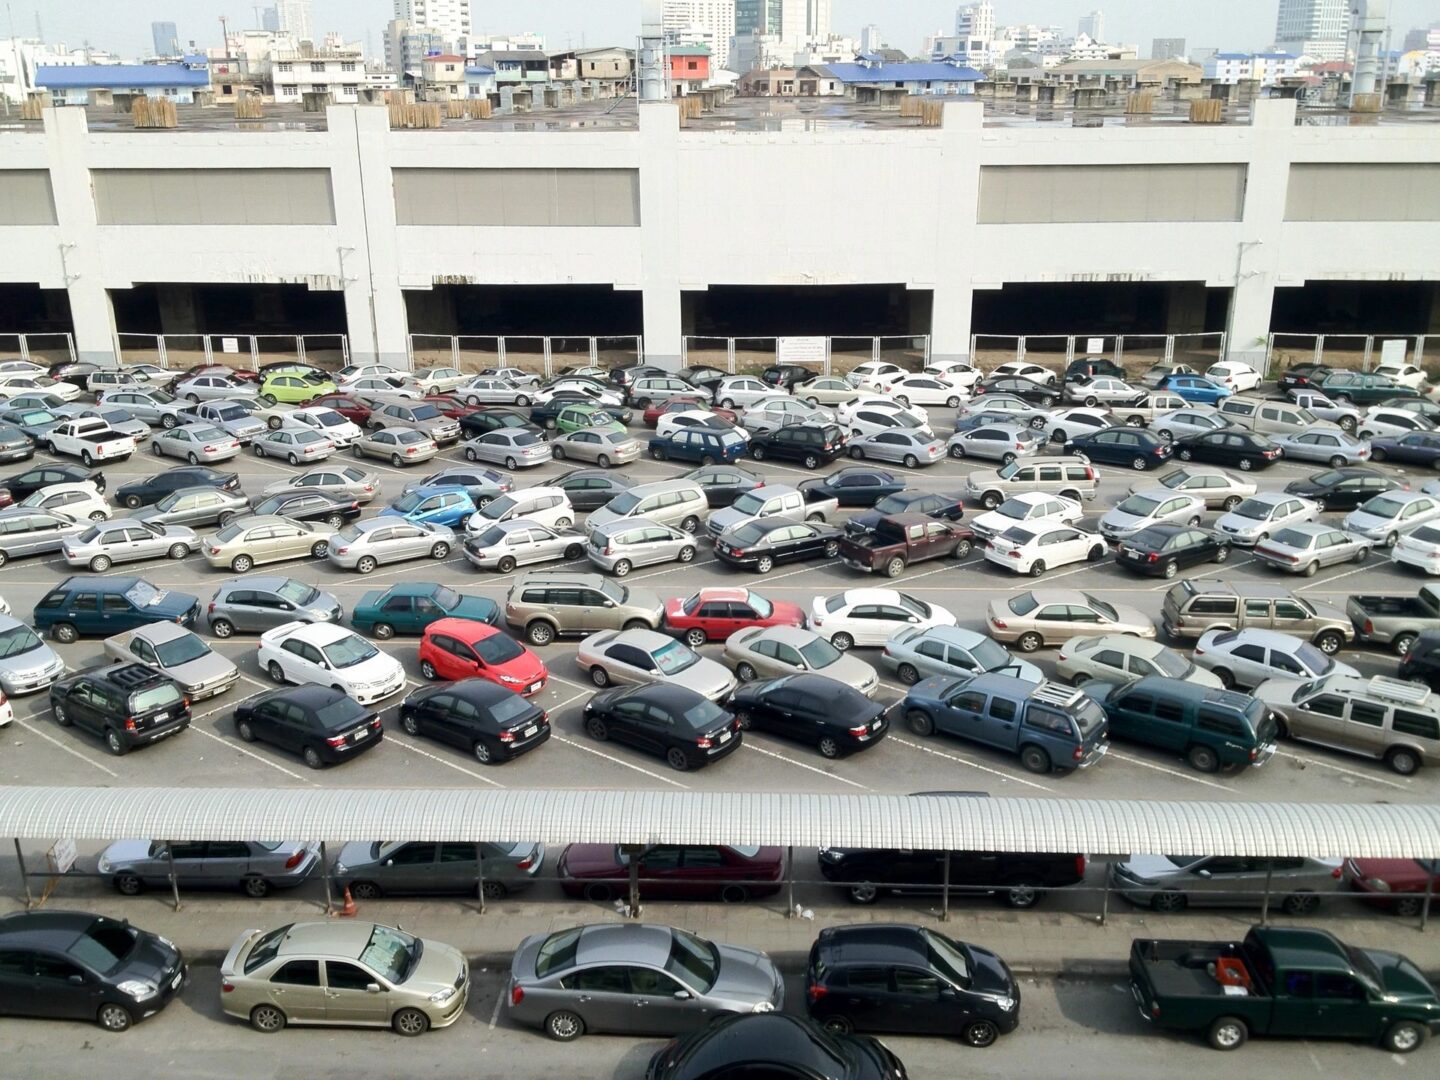 A parking lot filled with lots of cars parked.